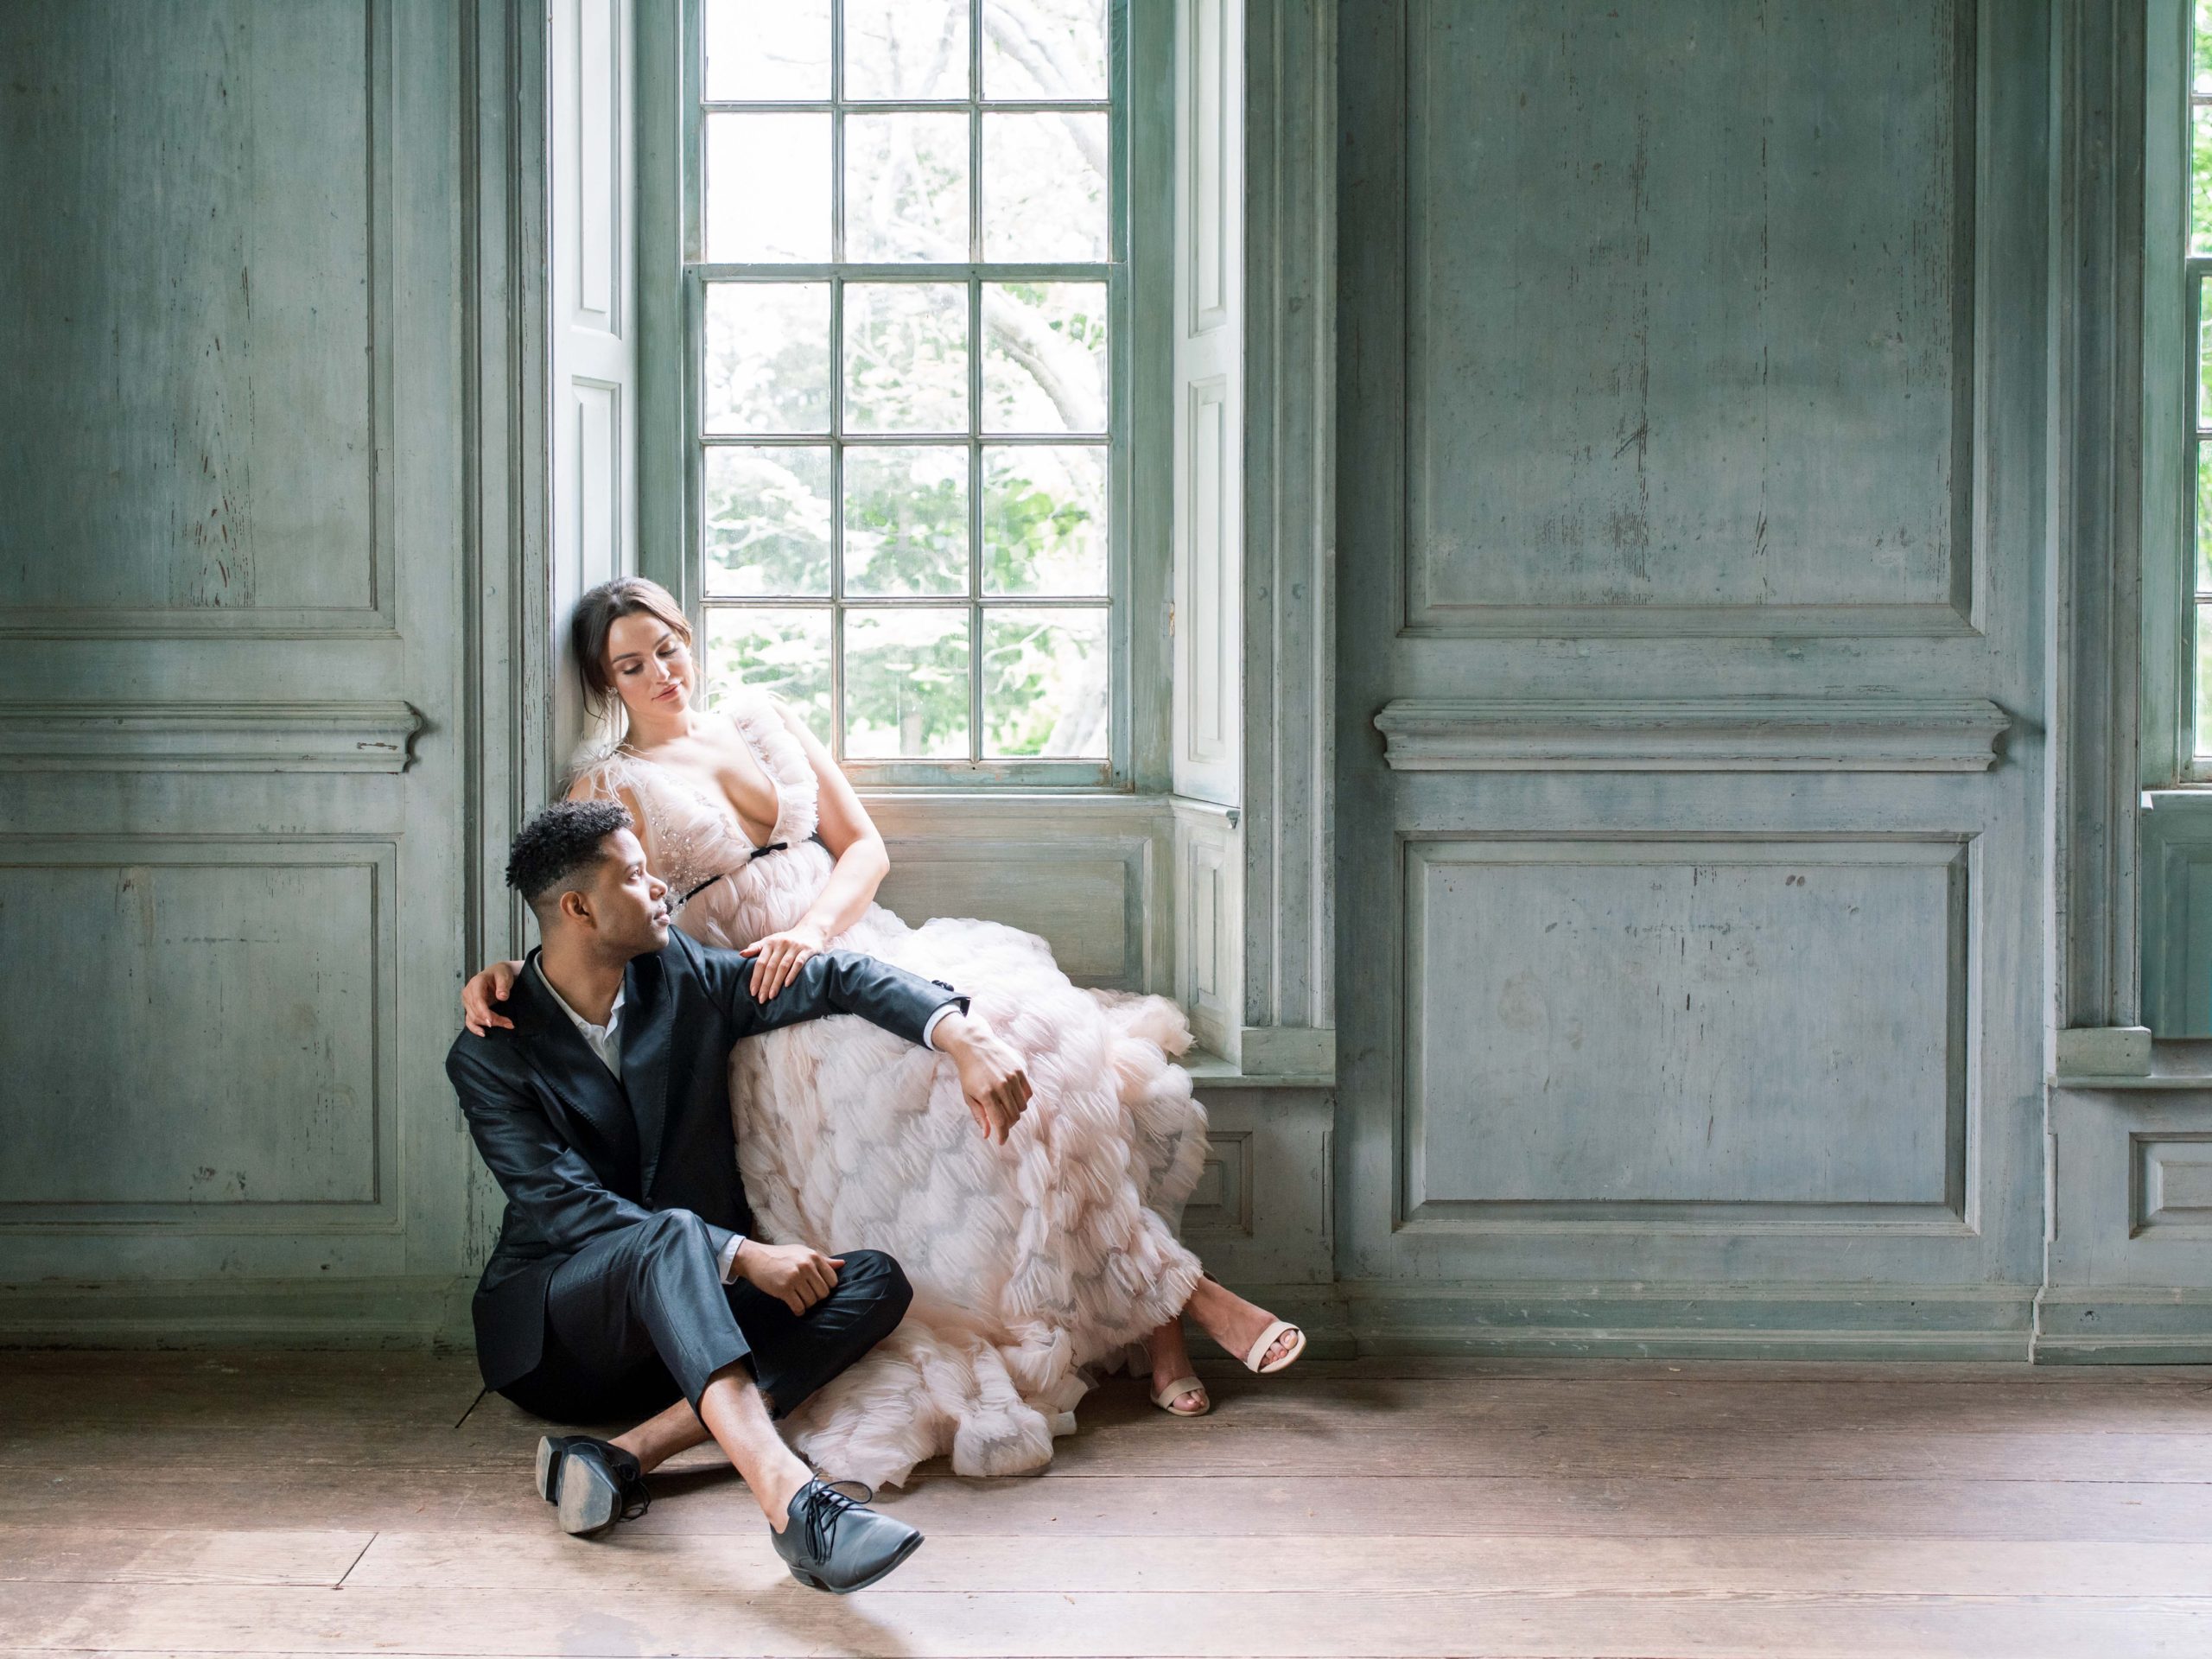 A refined wedding editorial at Historic Salubria in Virginia. Captured by Washington, DC wedding photographer, Alicia Lacey.